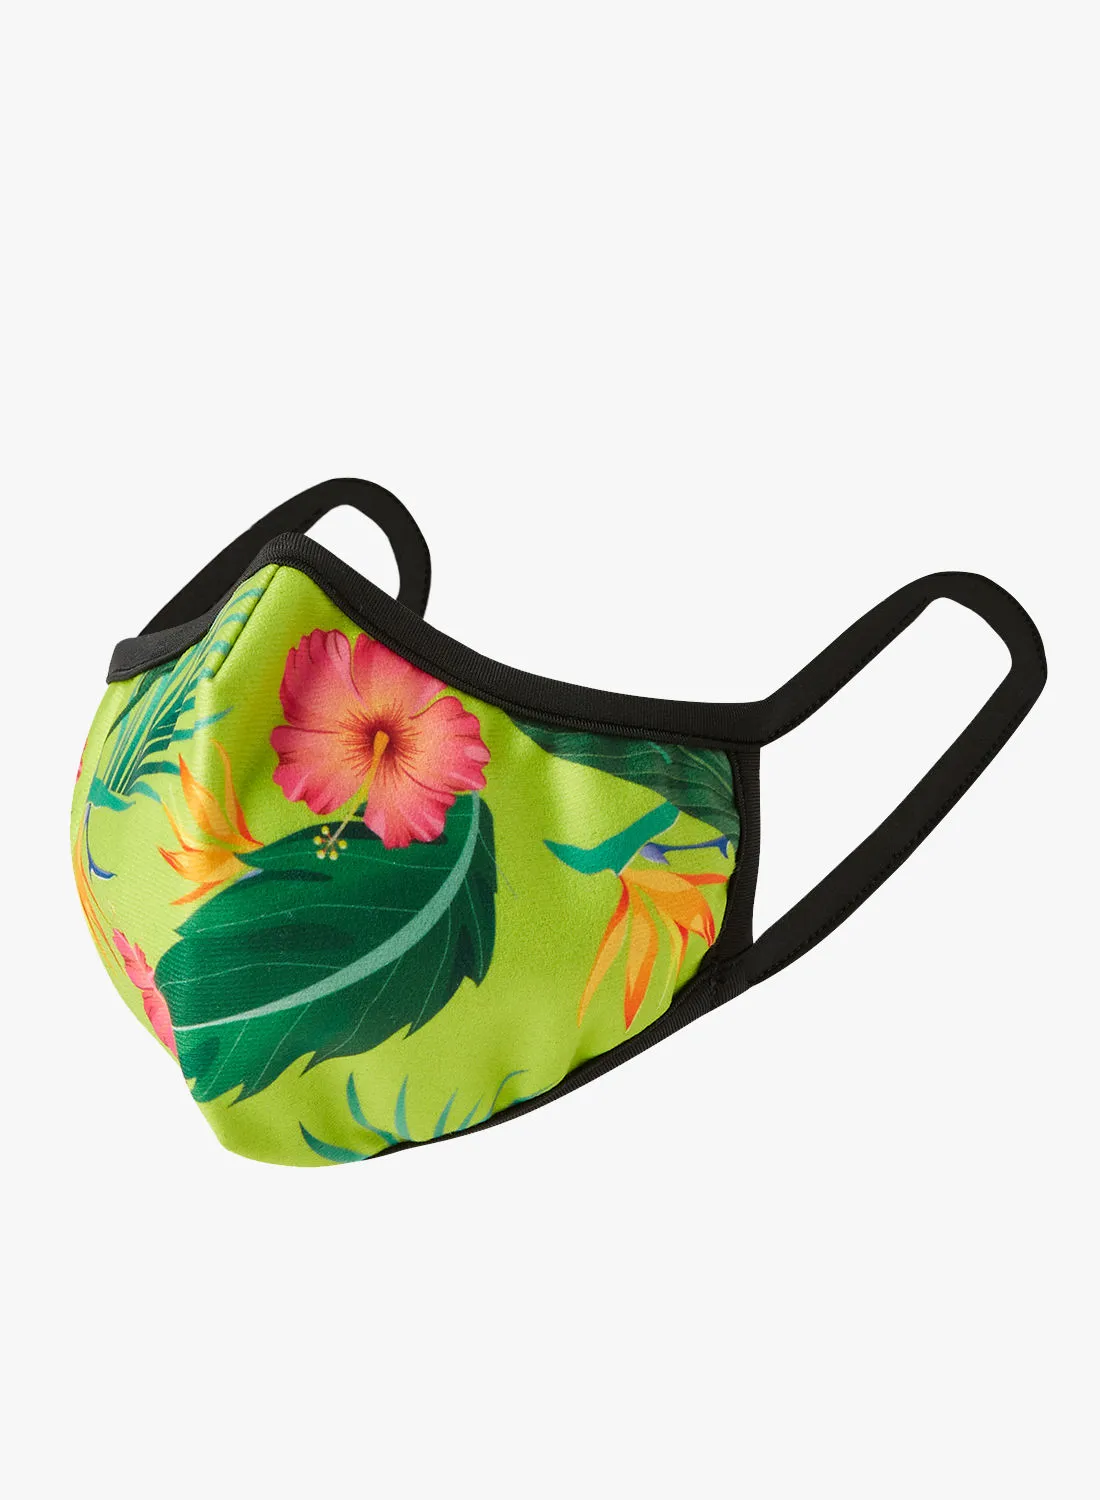 Nomad Mask Unisex Tropical Print Face Mask Green